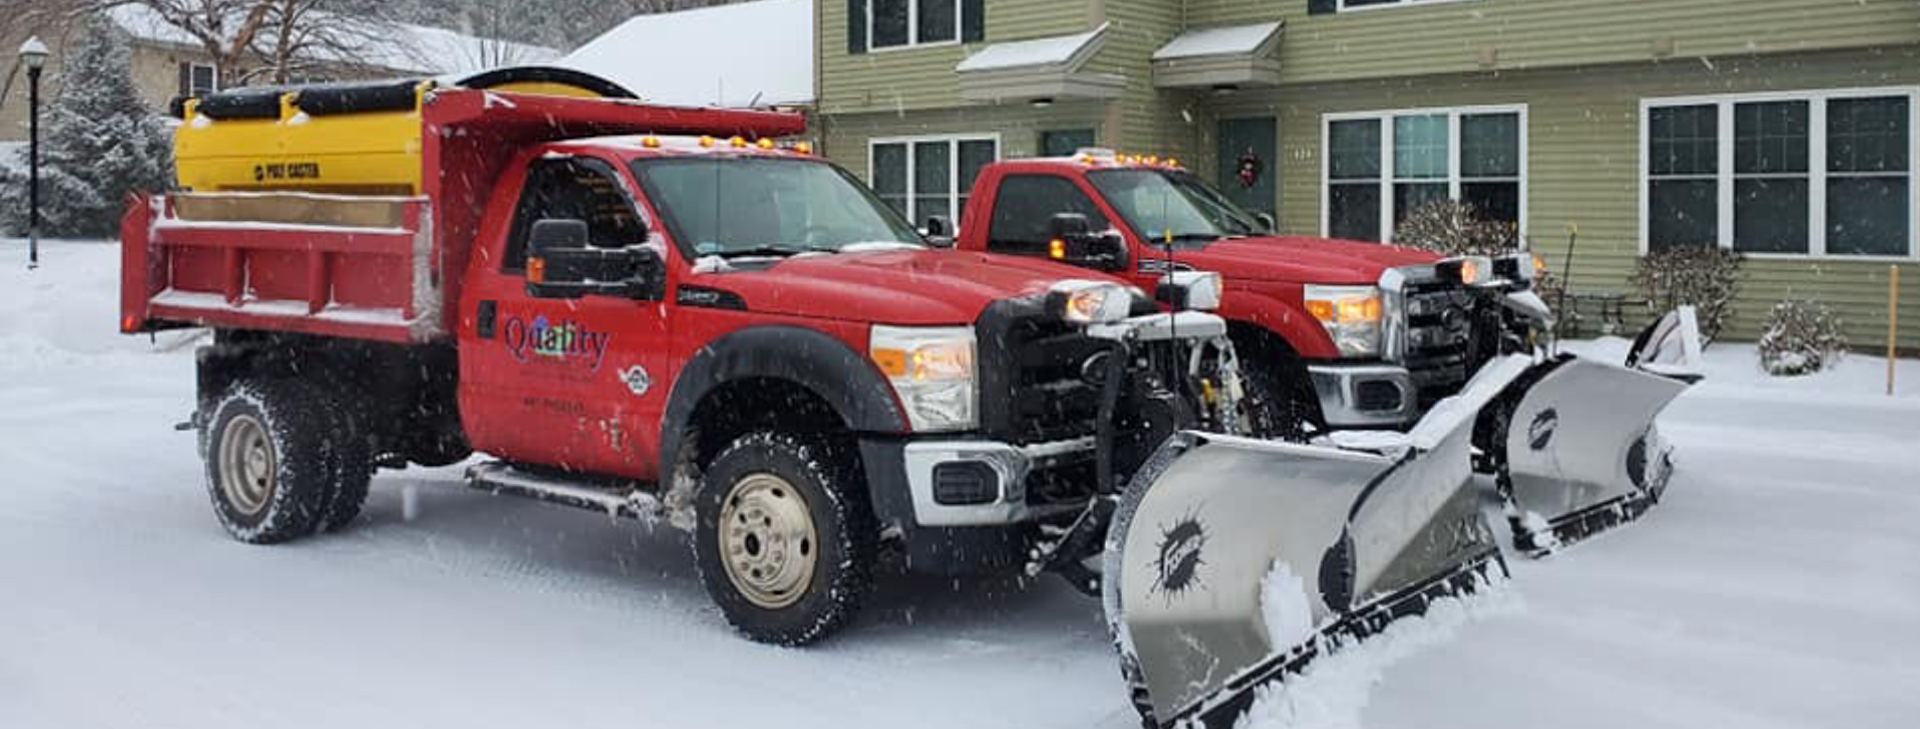 Quality Landscaping LLC NH Snow removal